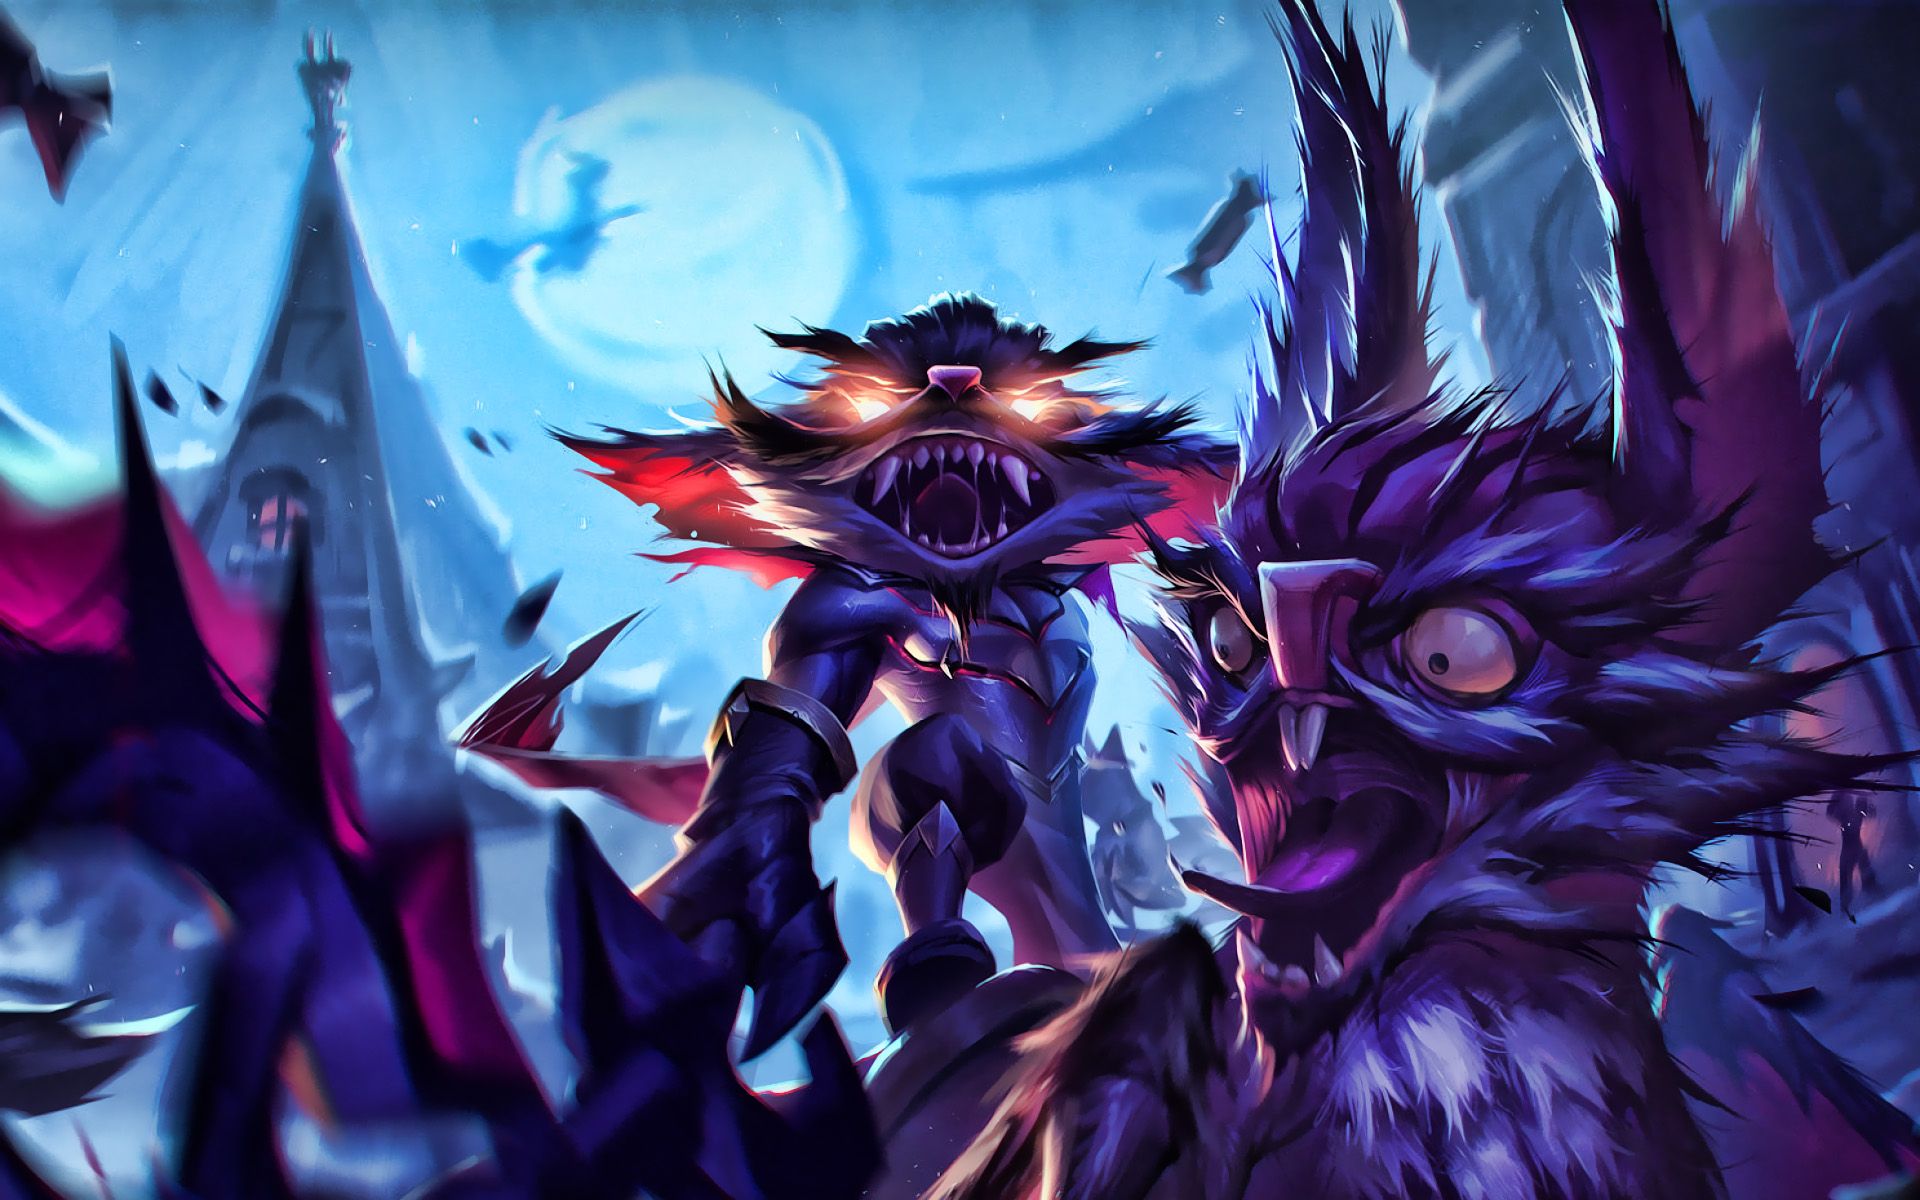 Download wallpaper Kled, MOBA, League of Legends, 2020 games, monsters, artwork, Kled League of Legends for desktop with resolution 1920x1200. High Quality HD picture wallpaper